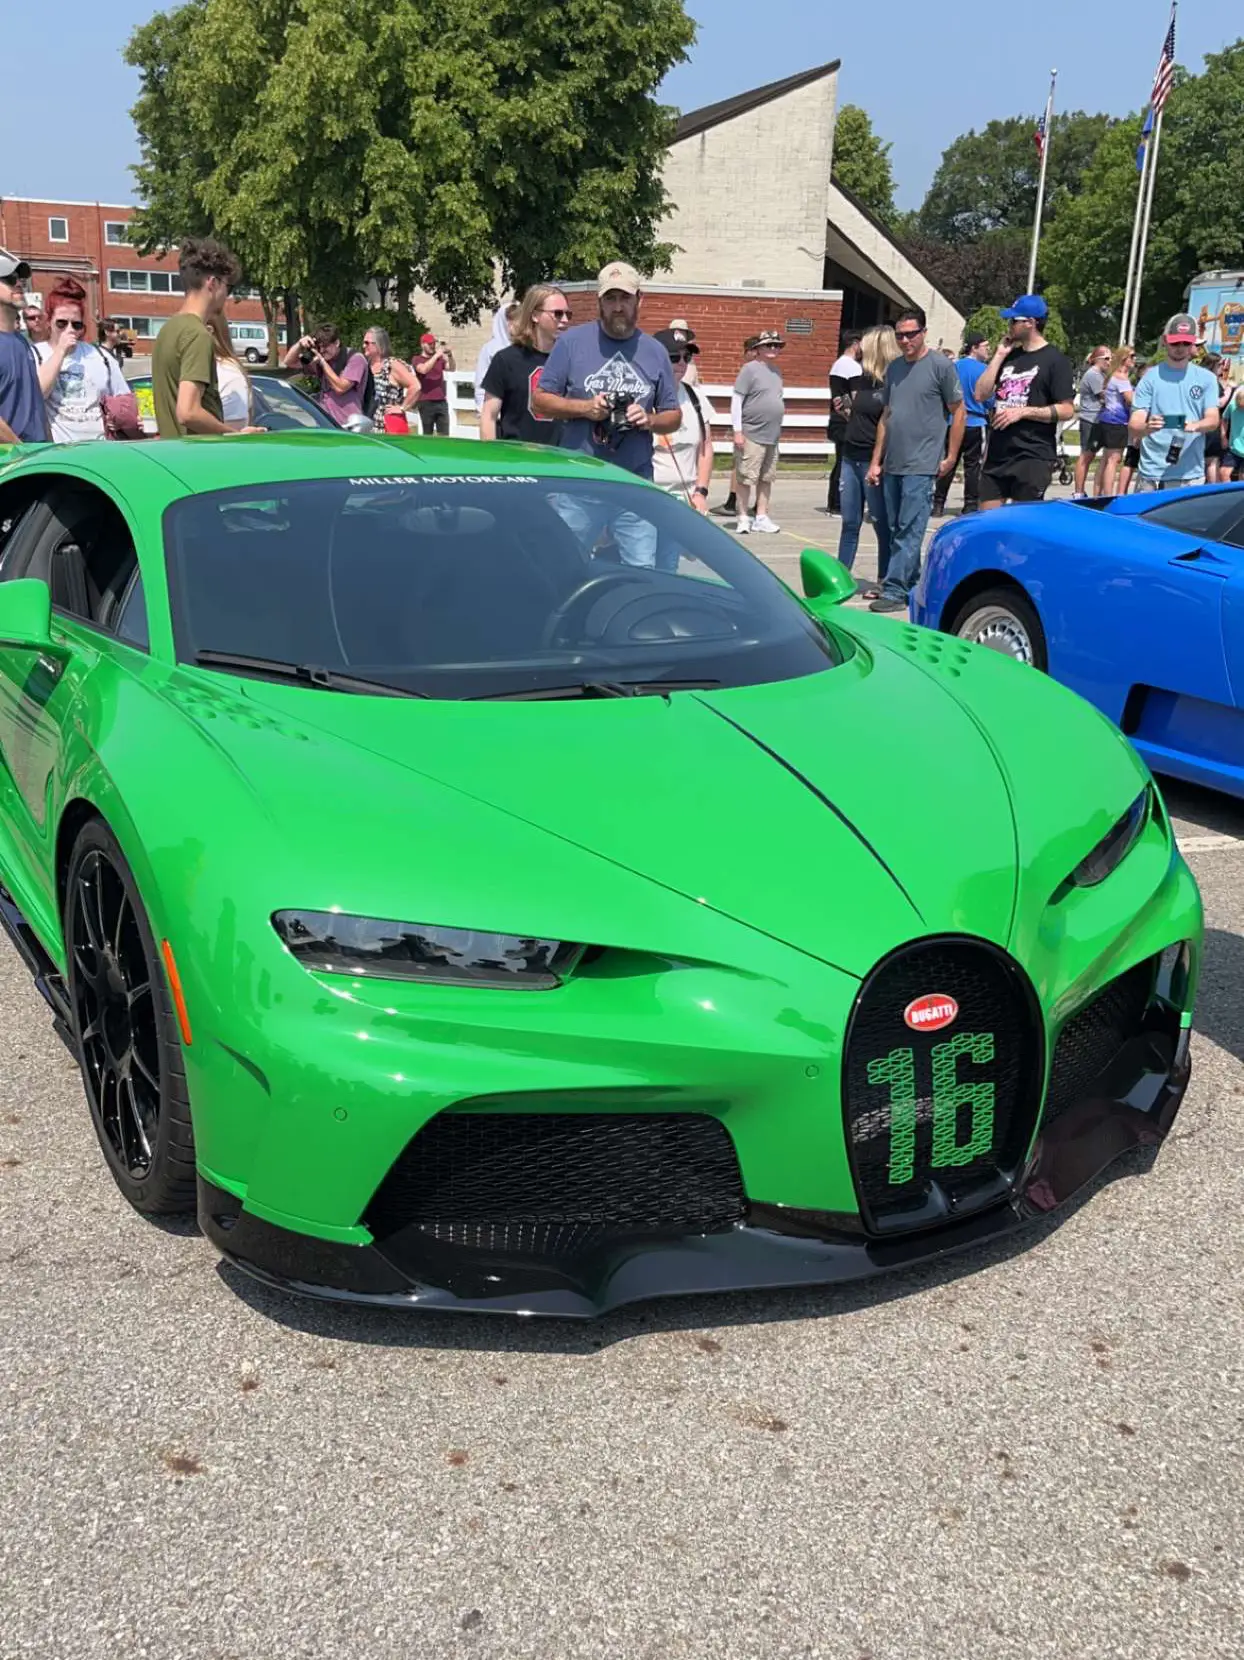 Bugatti Chiron Pur Sport and Super Sport 300+ Are a Yin and Yang